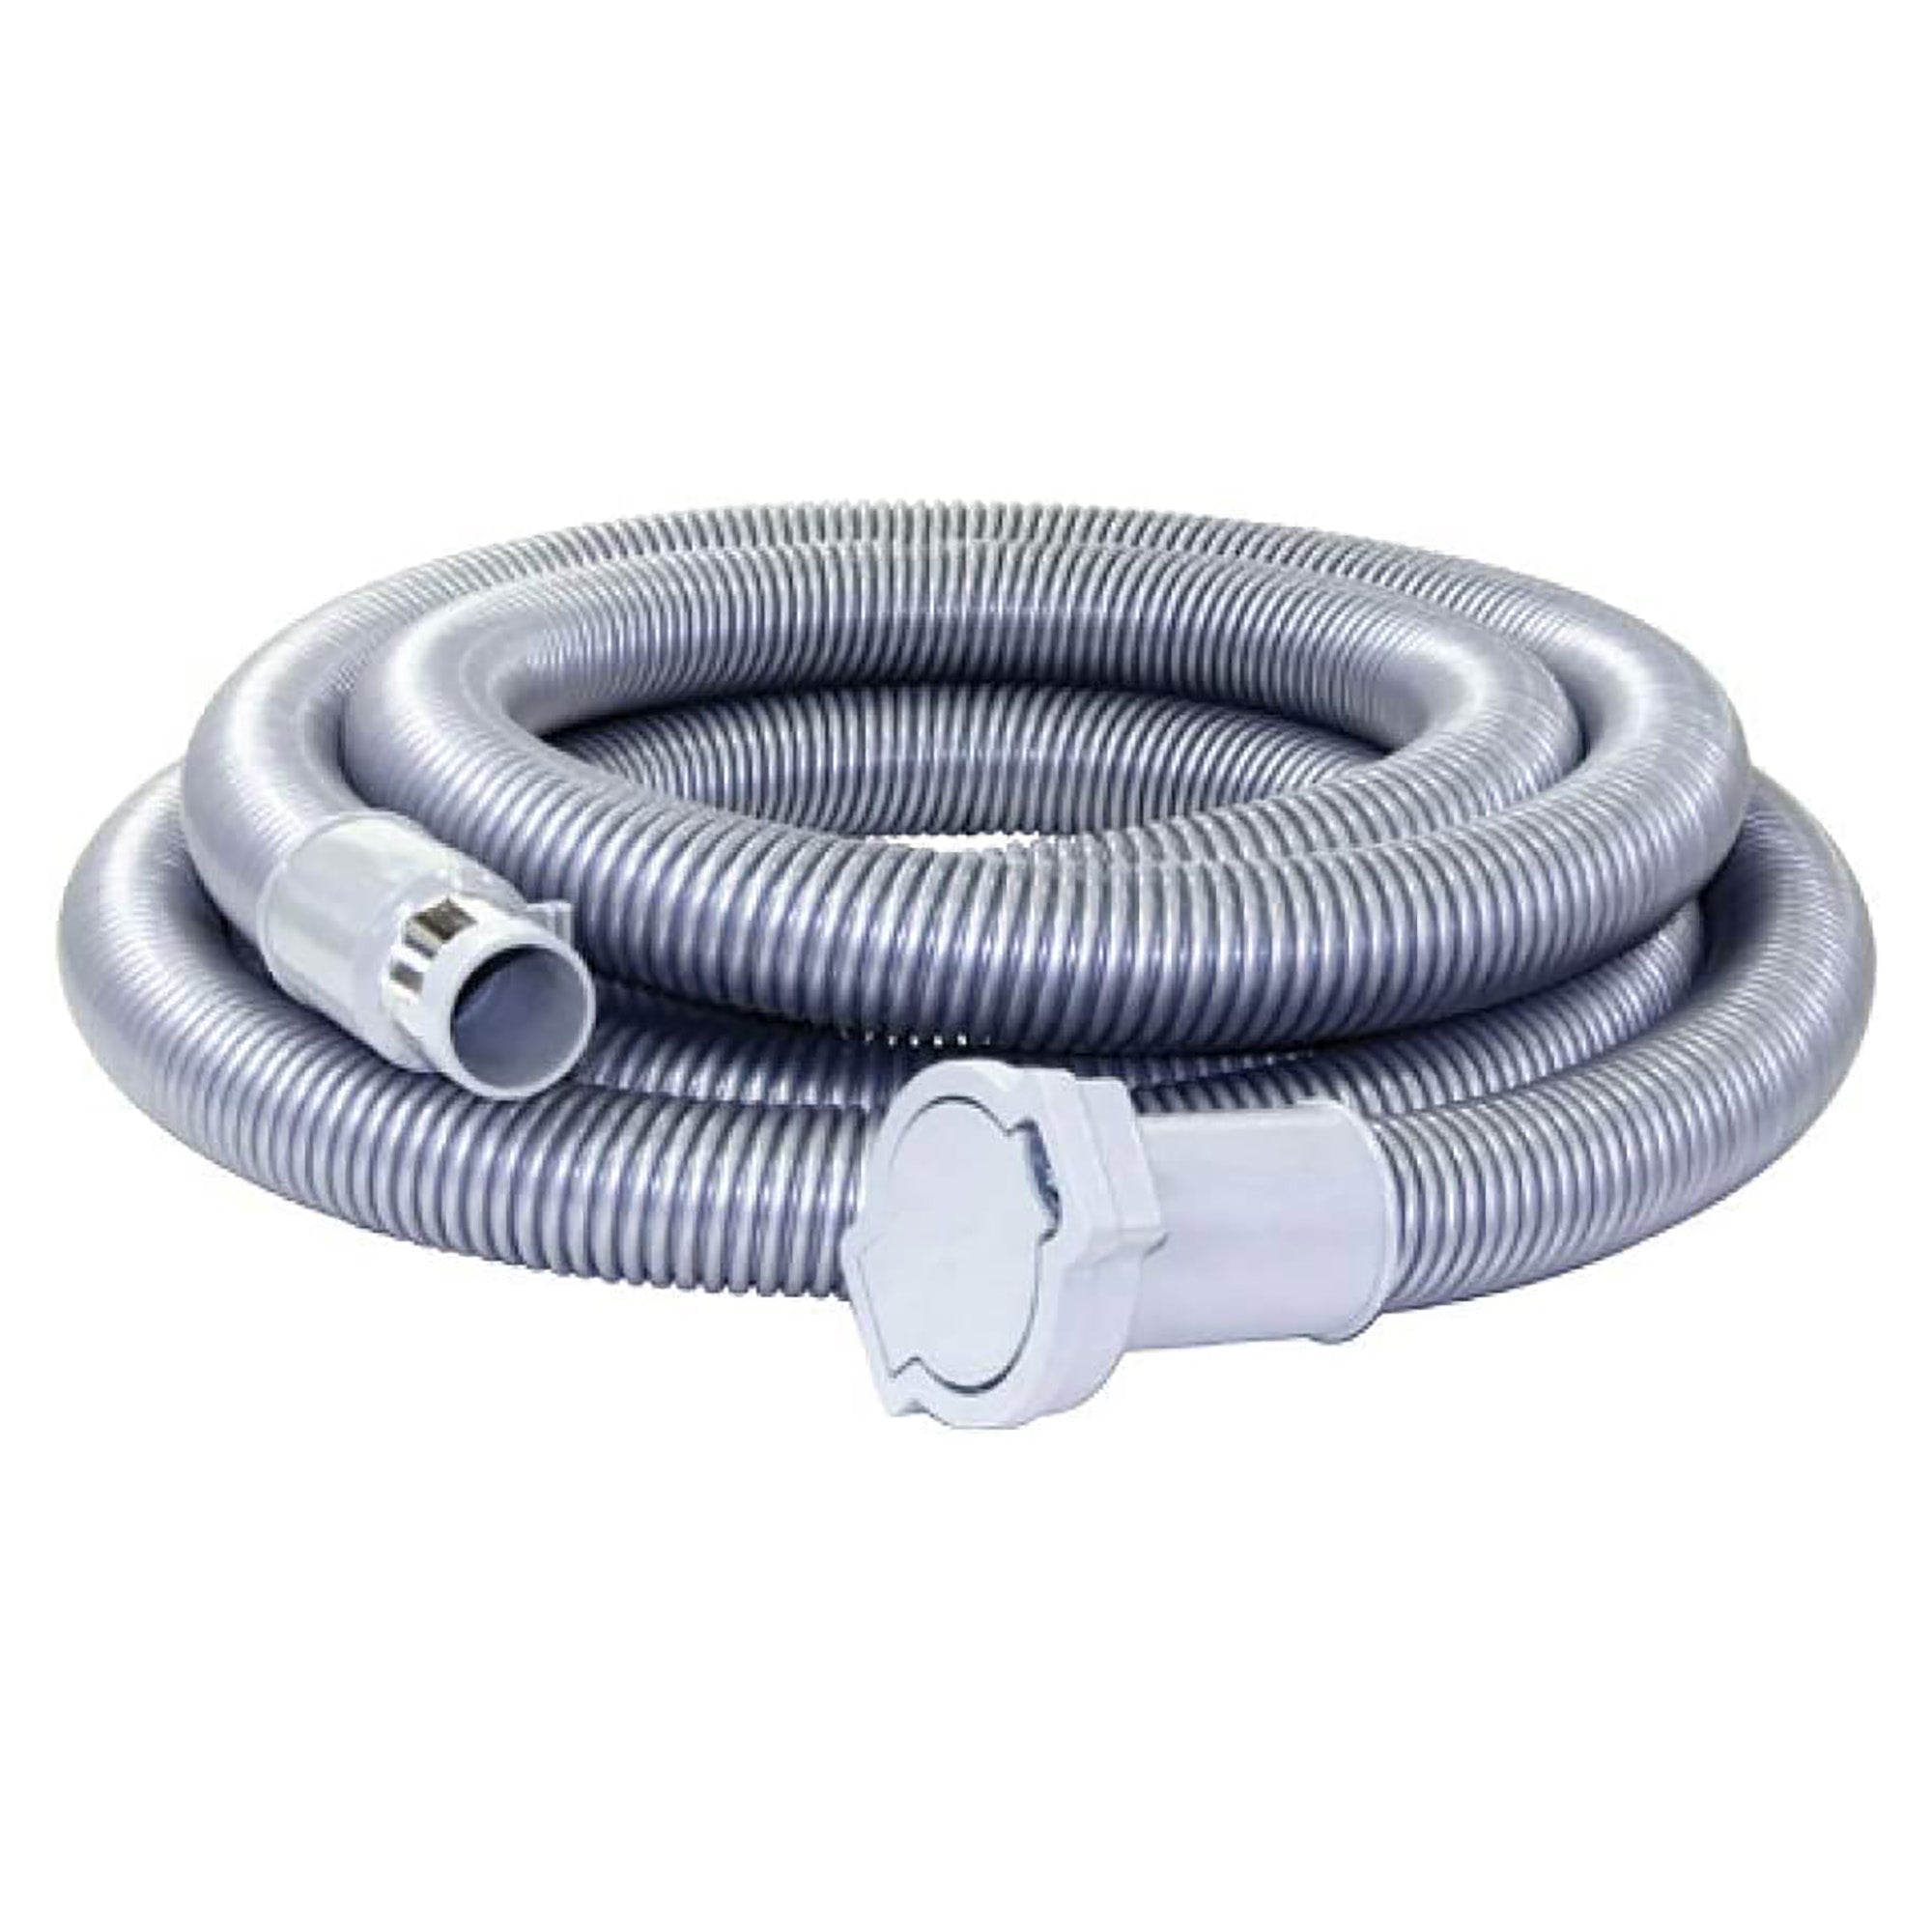 VPC Central Vacuum Cleaner Low Voltage Hose Extension | Fits All Standard 1.5 Wall Inlet